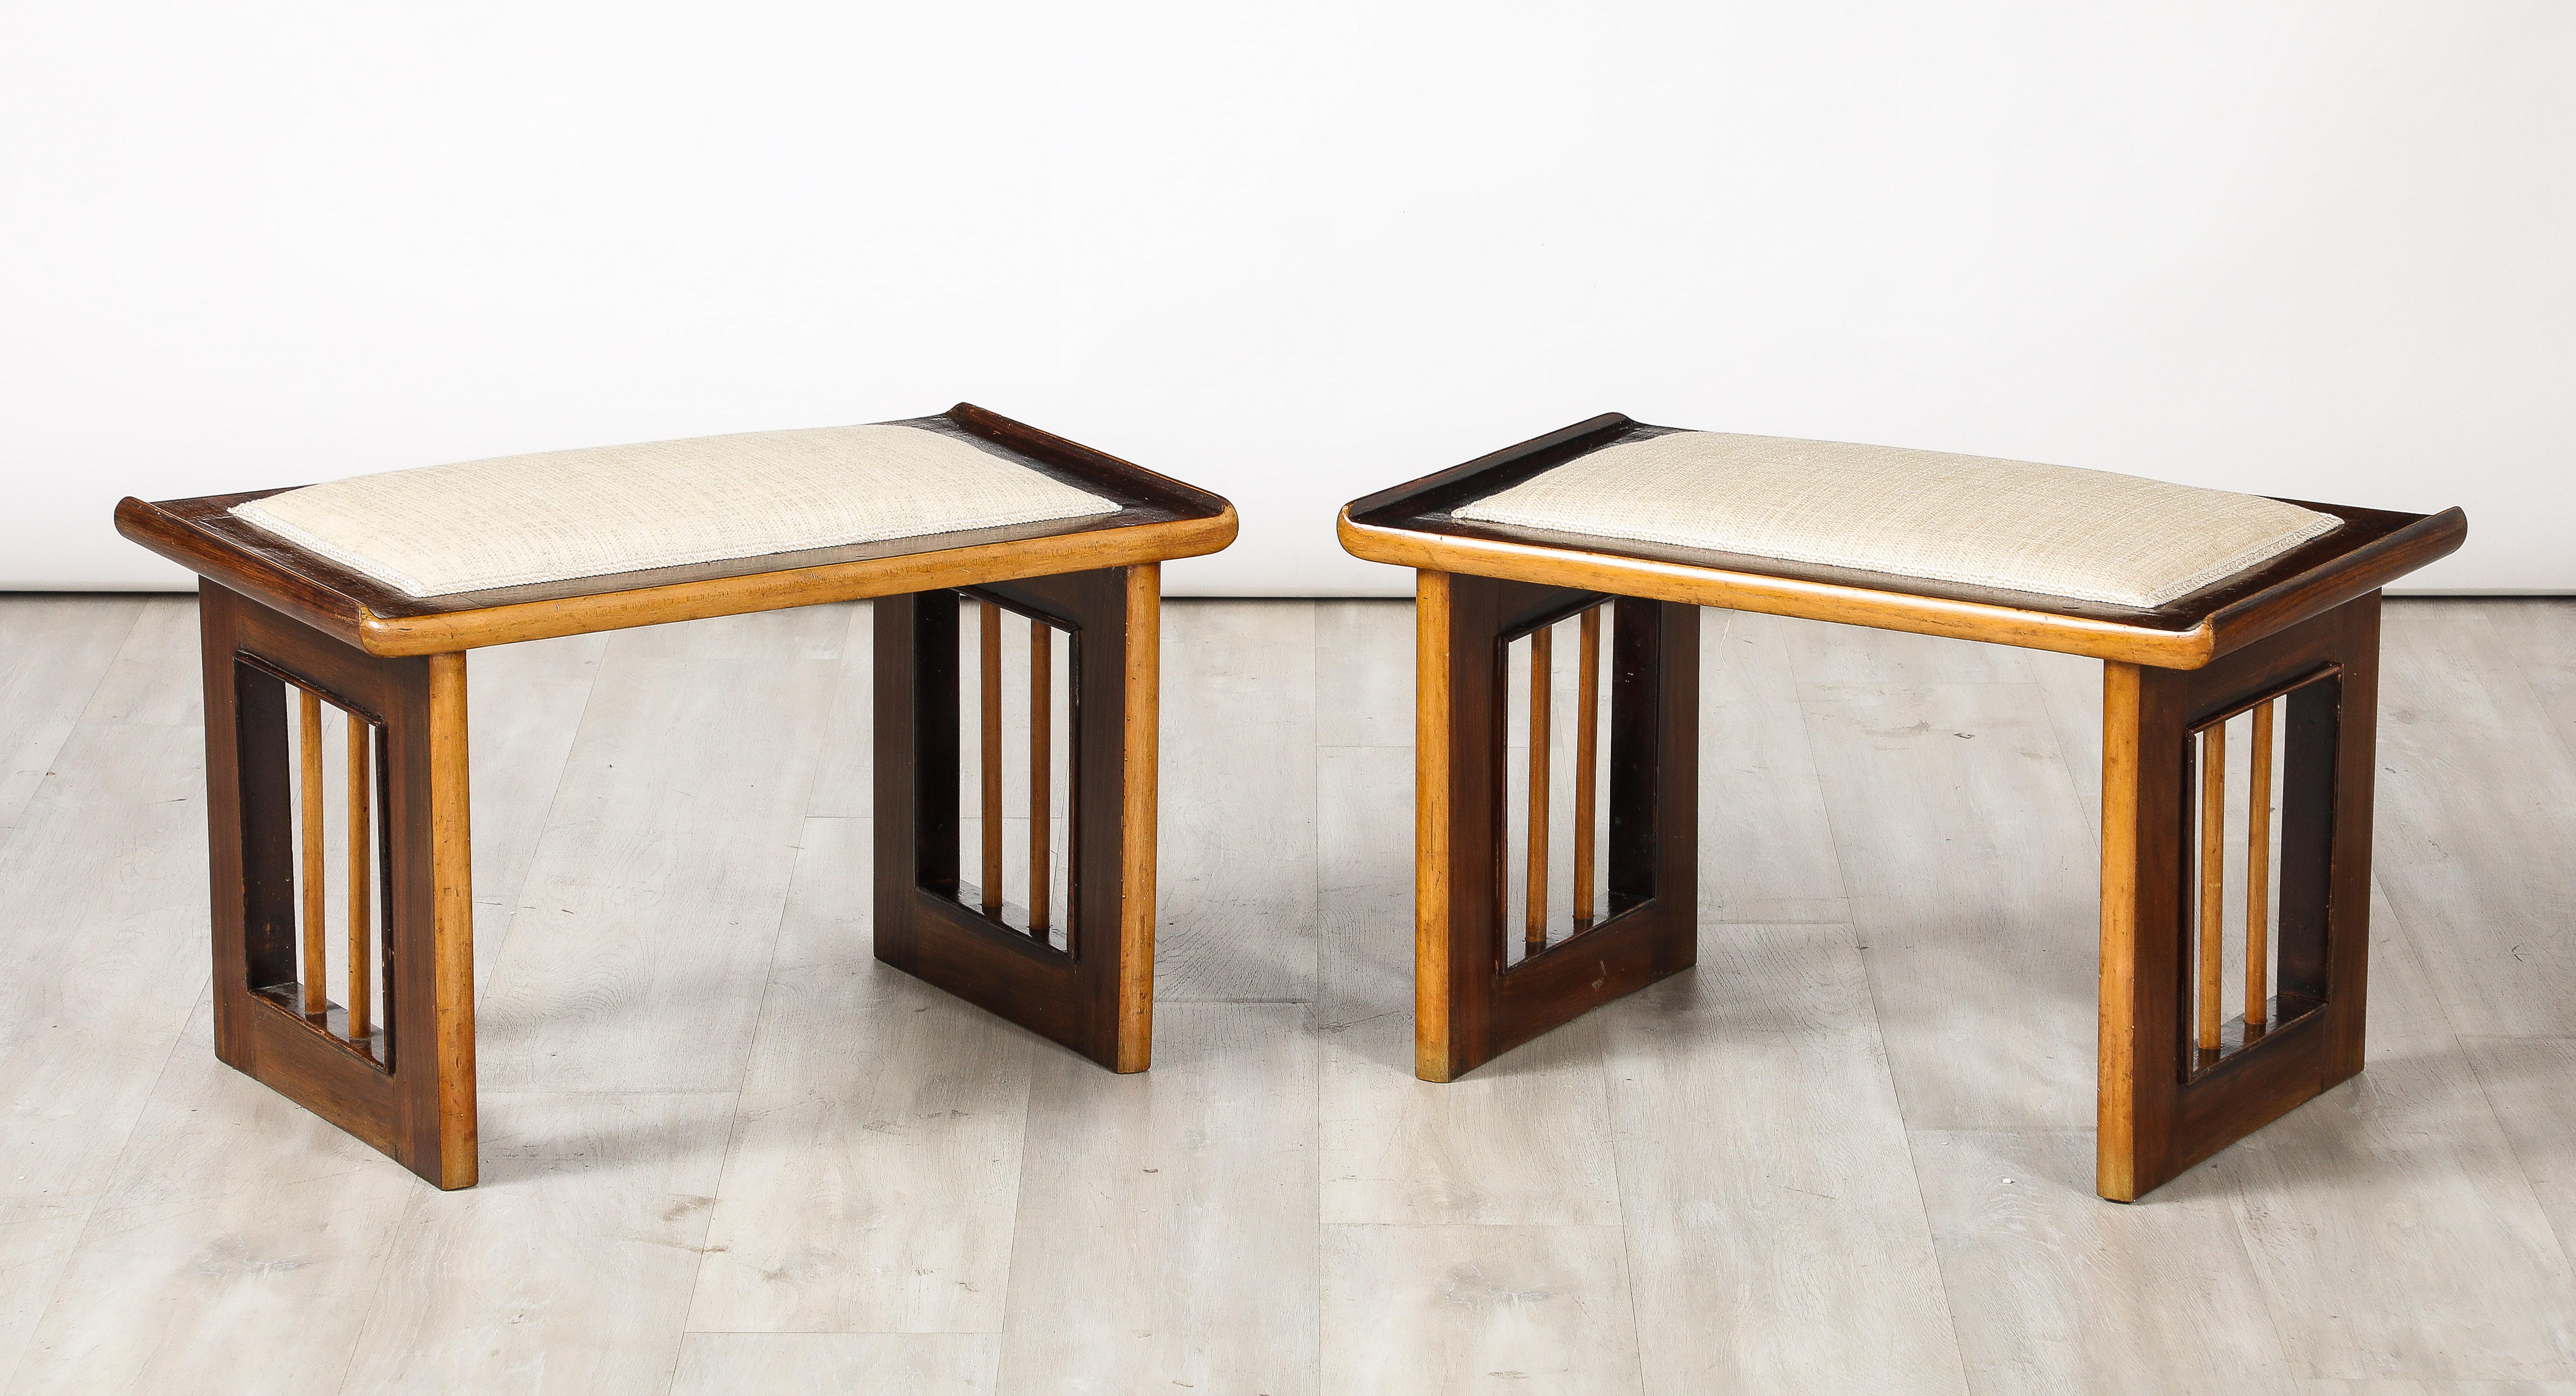 A pair of Italian Art Deco stools, in walnut and fruitwood with an inset linen seat cushion. It's sides with open slats and turned fruitwood spindles.  A wonderful contrast of woods, highly stylish and chic. 
Italy, circa 1940 
Size: 15 1/2